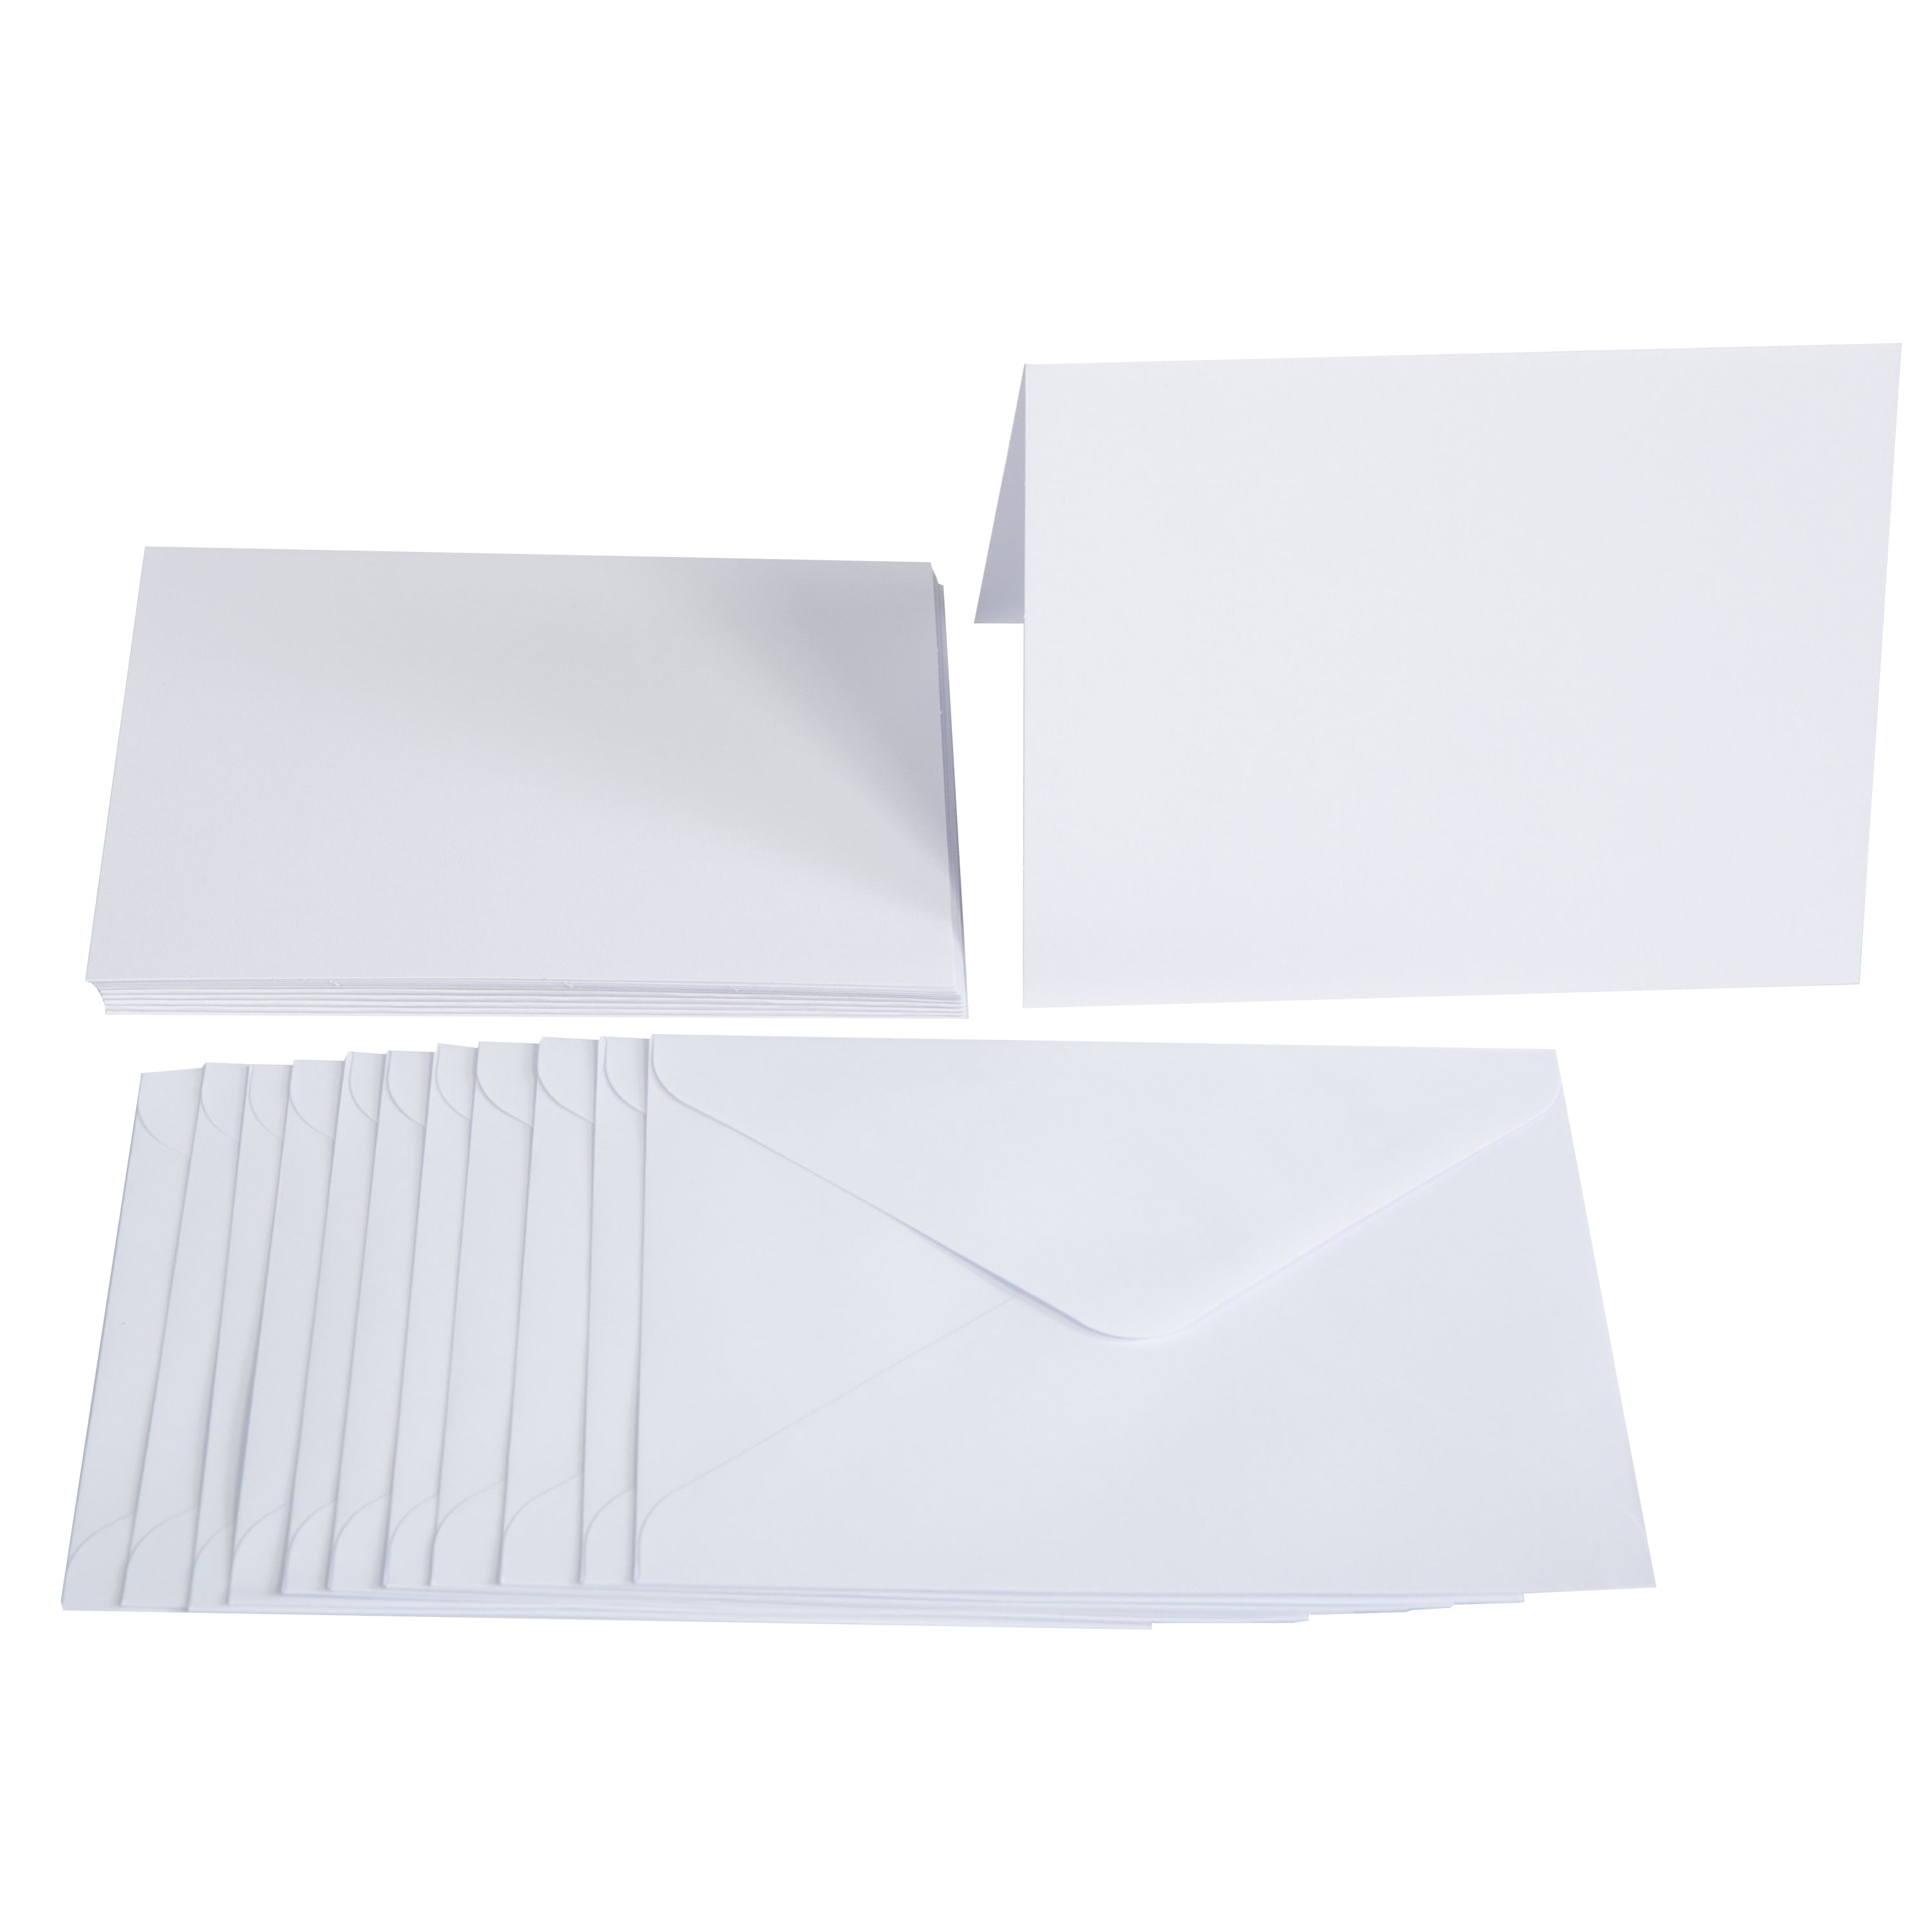 Hello Hobby Notecard Making Stamp Kit for All Occasions, 357 Pcs 